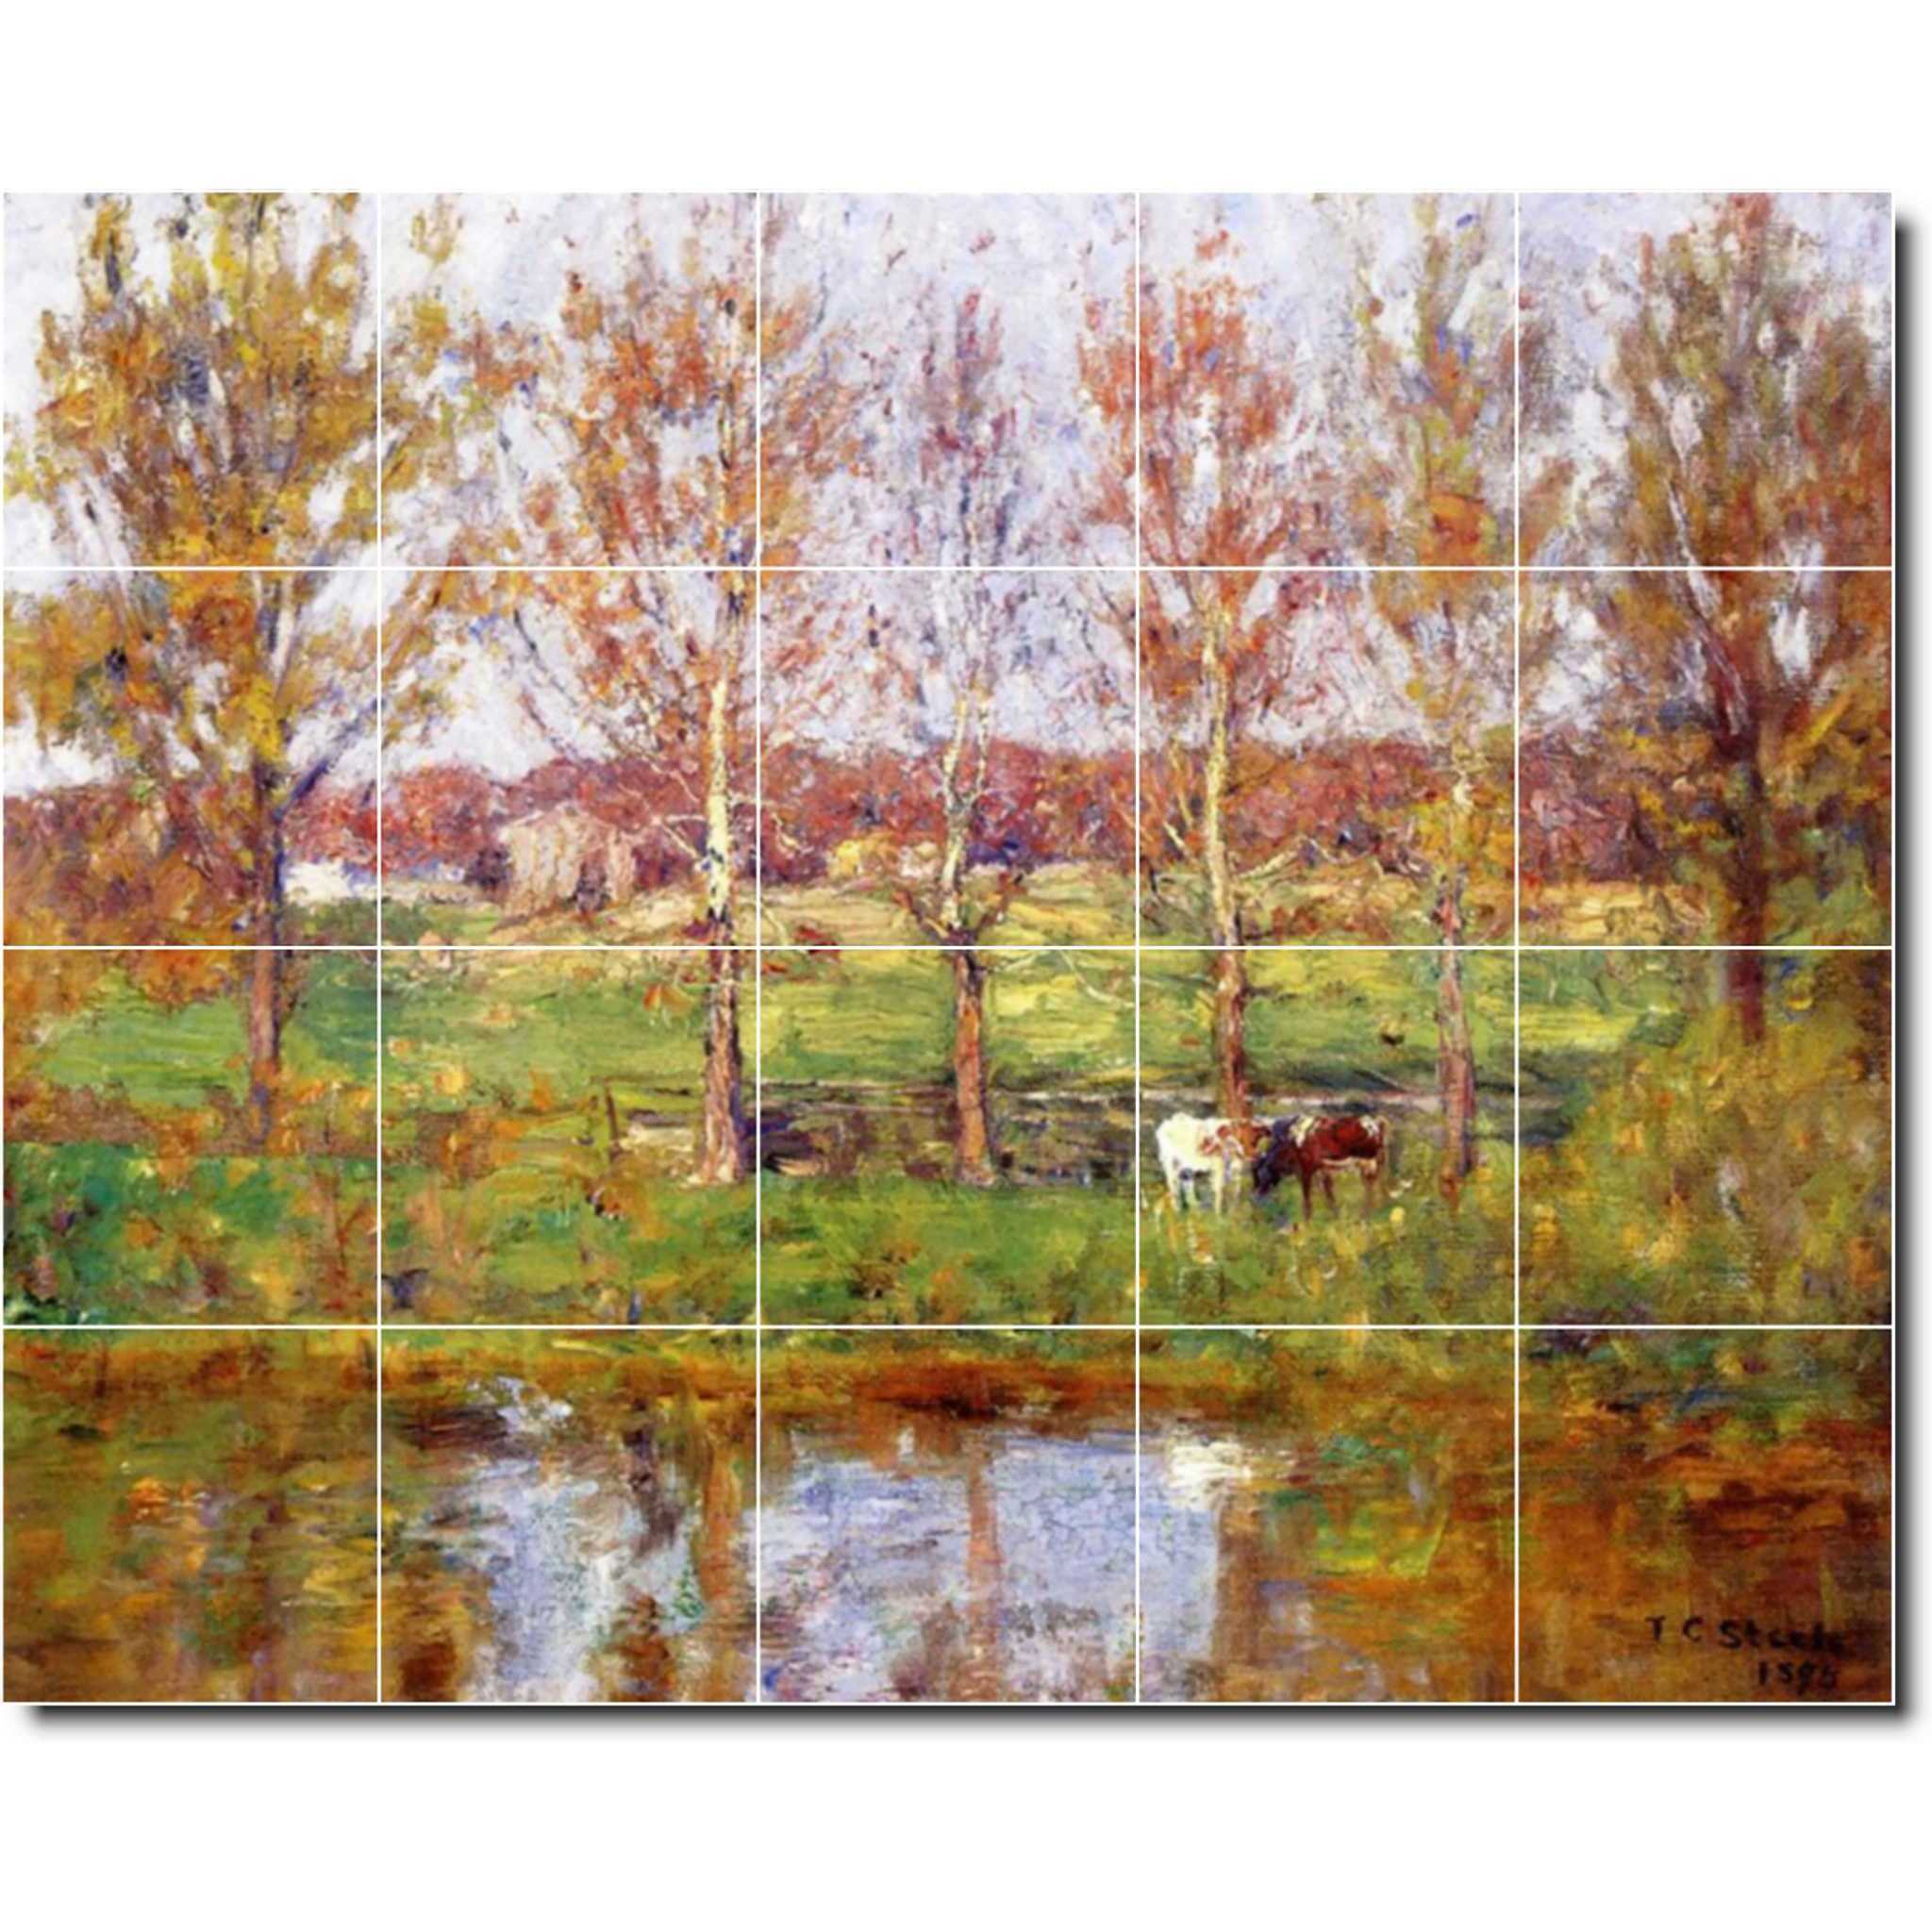 theodore steele country painting ceramic tile mural p08367